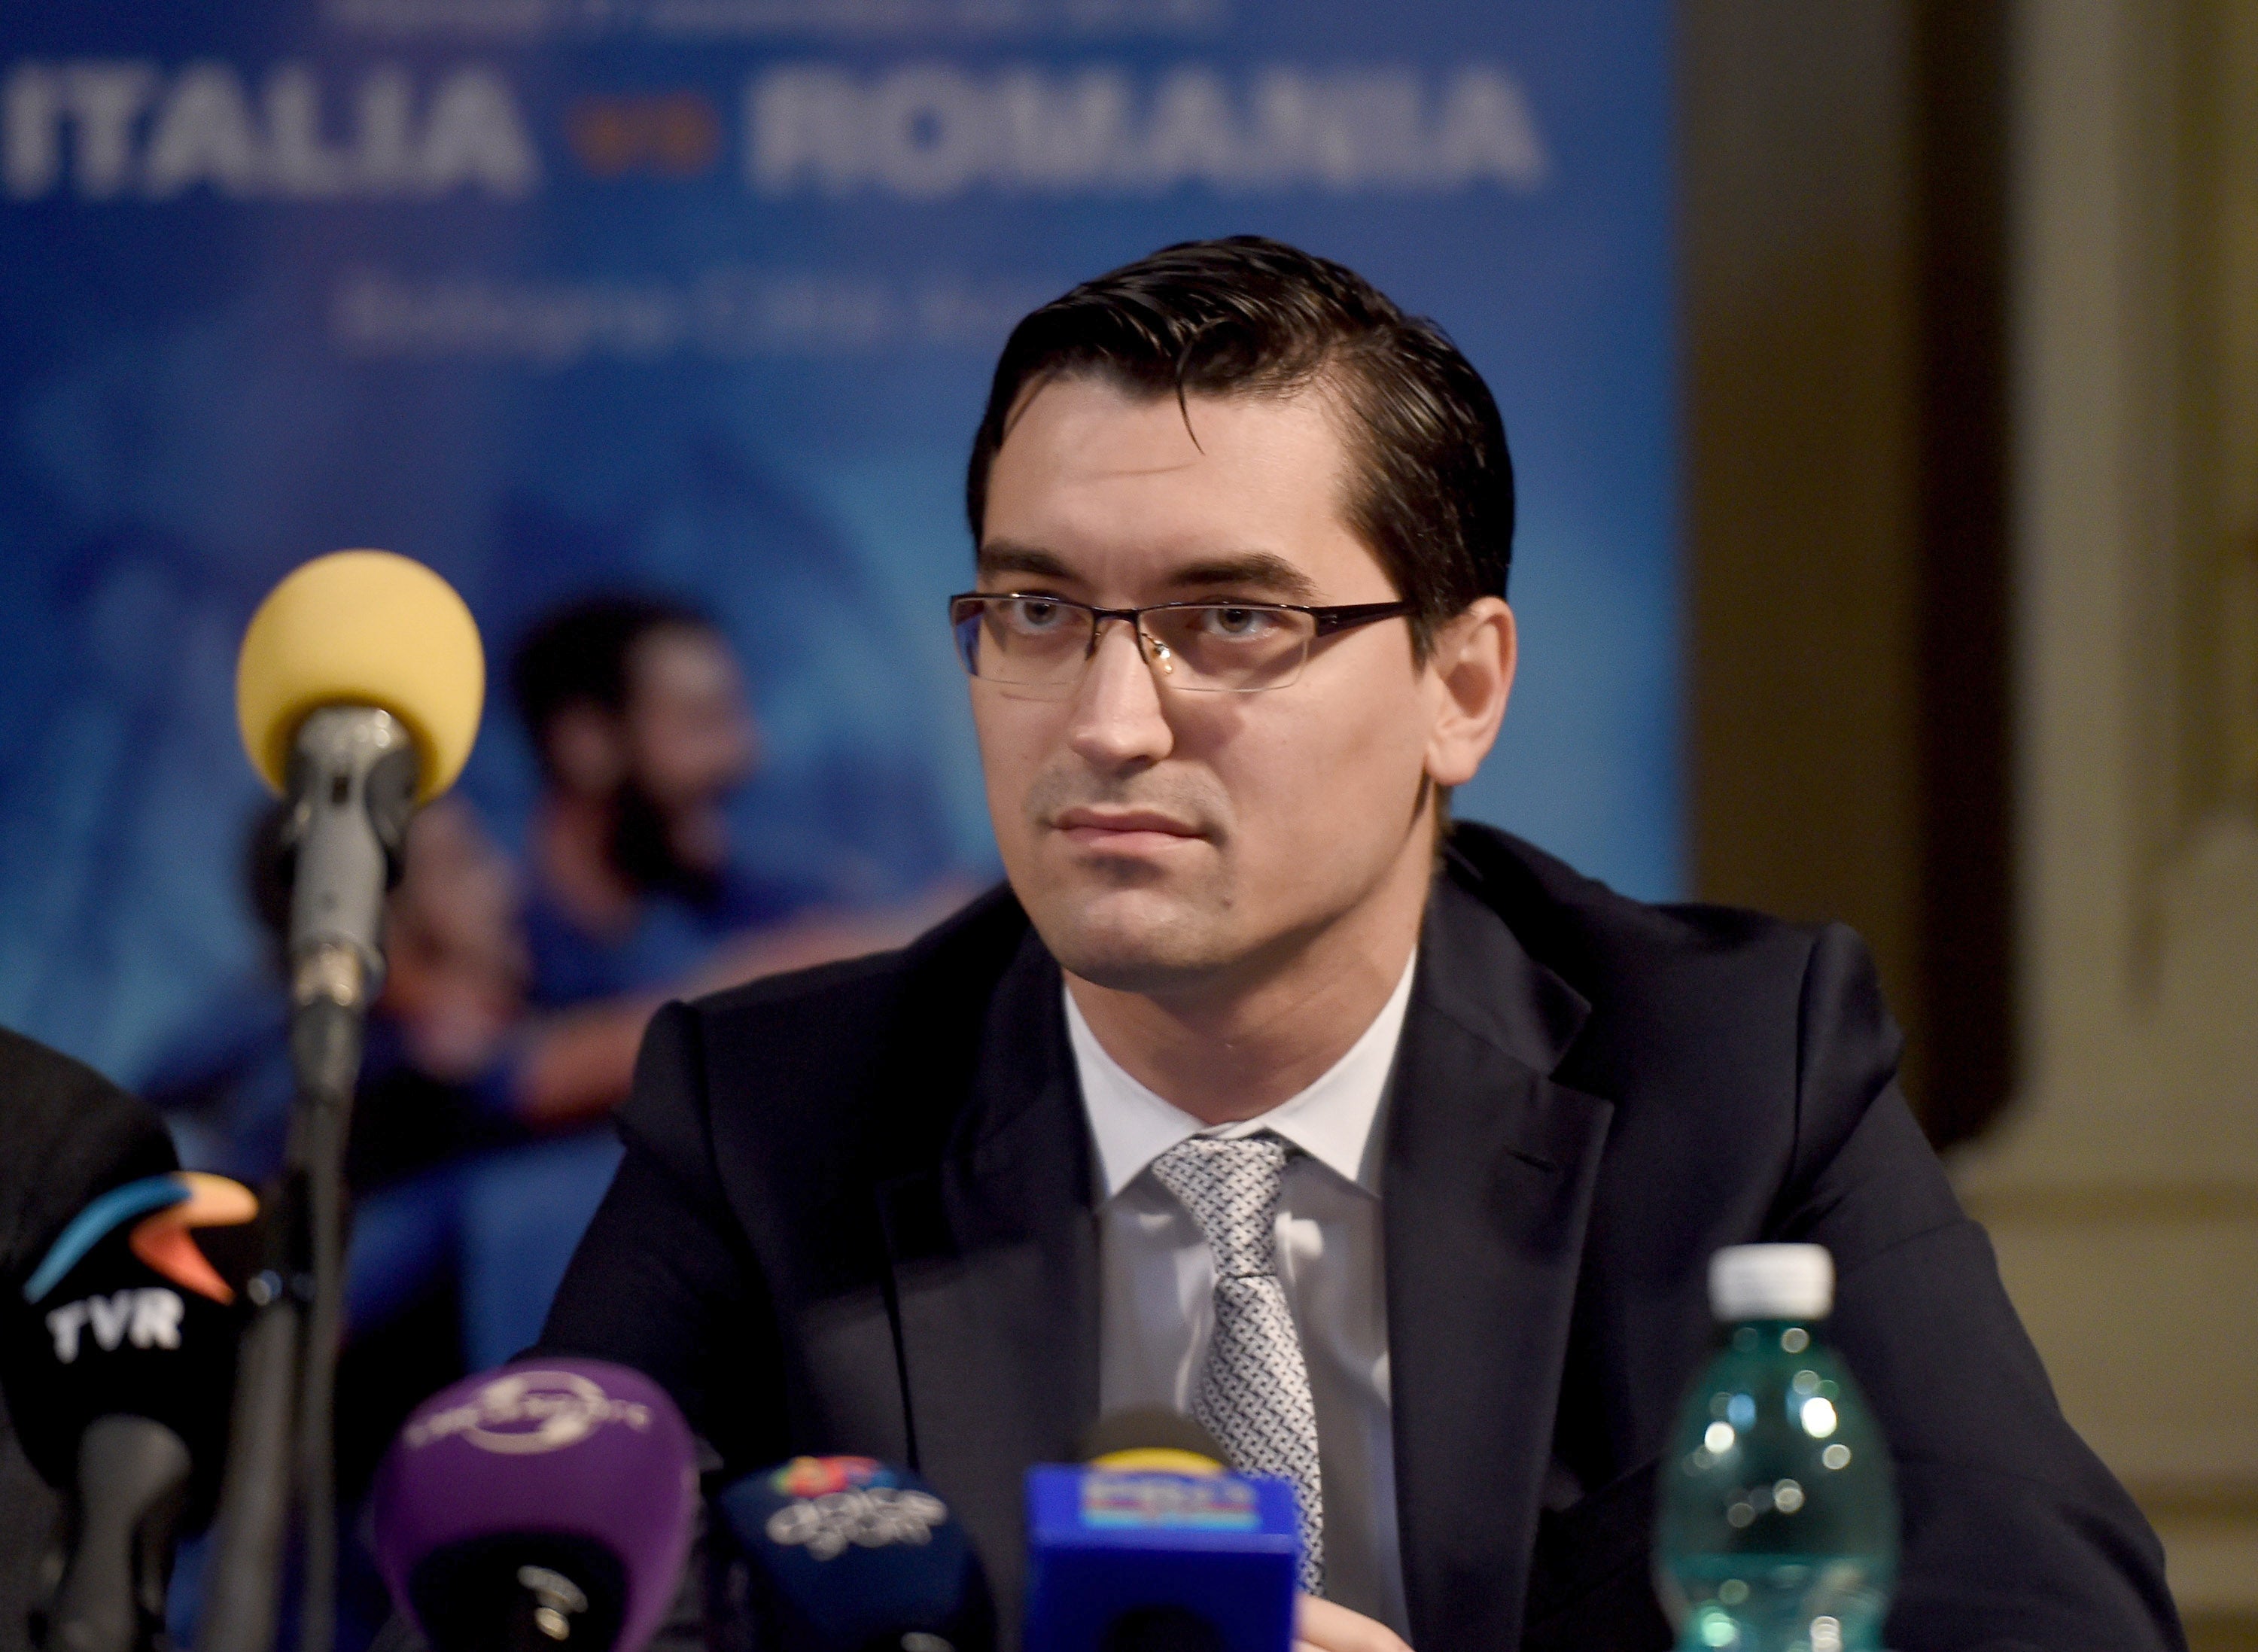 Burleanu has been the head of the Romanian football federation since 2014